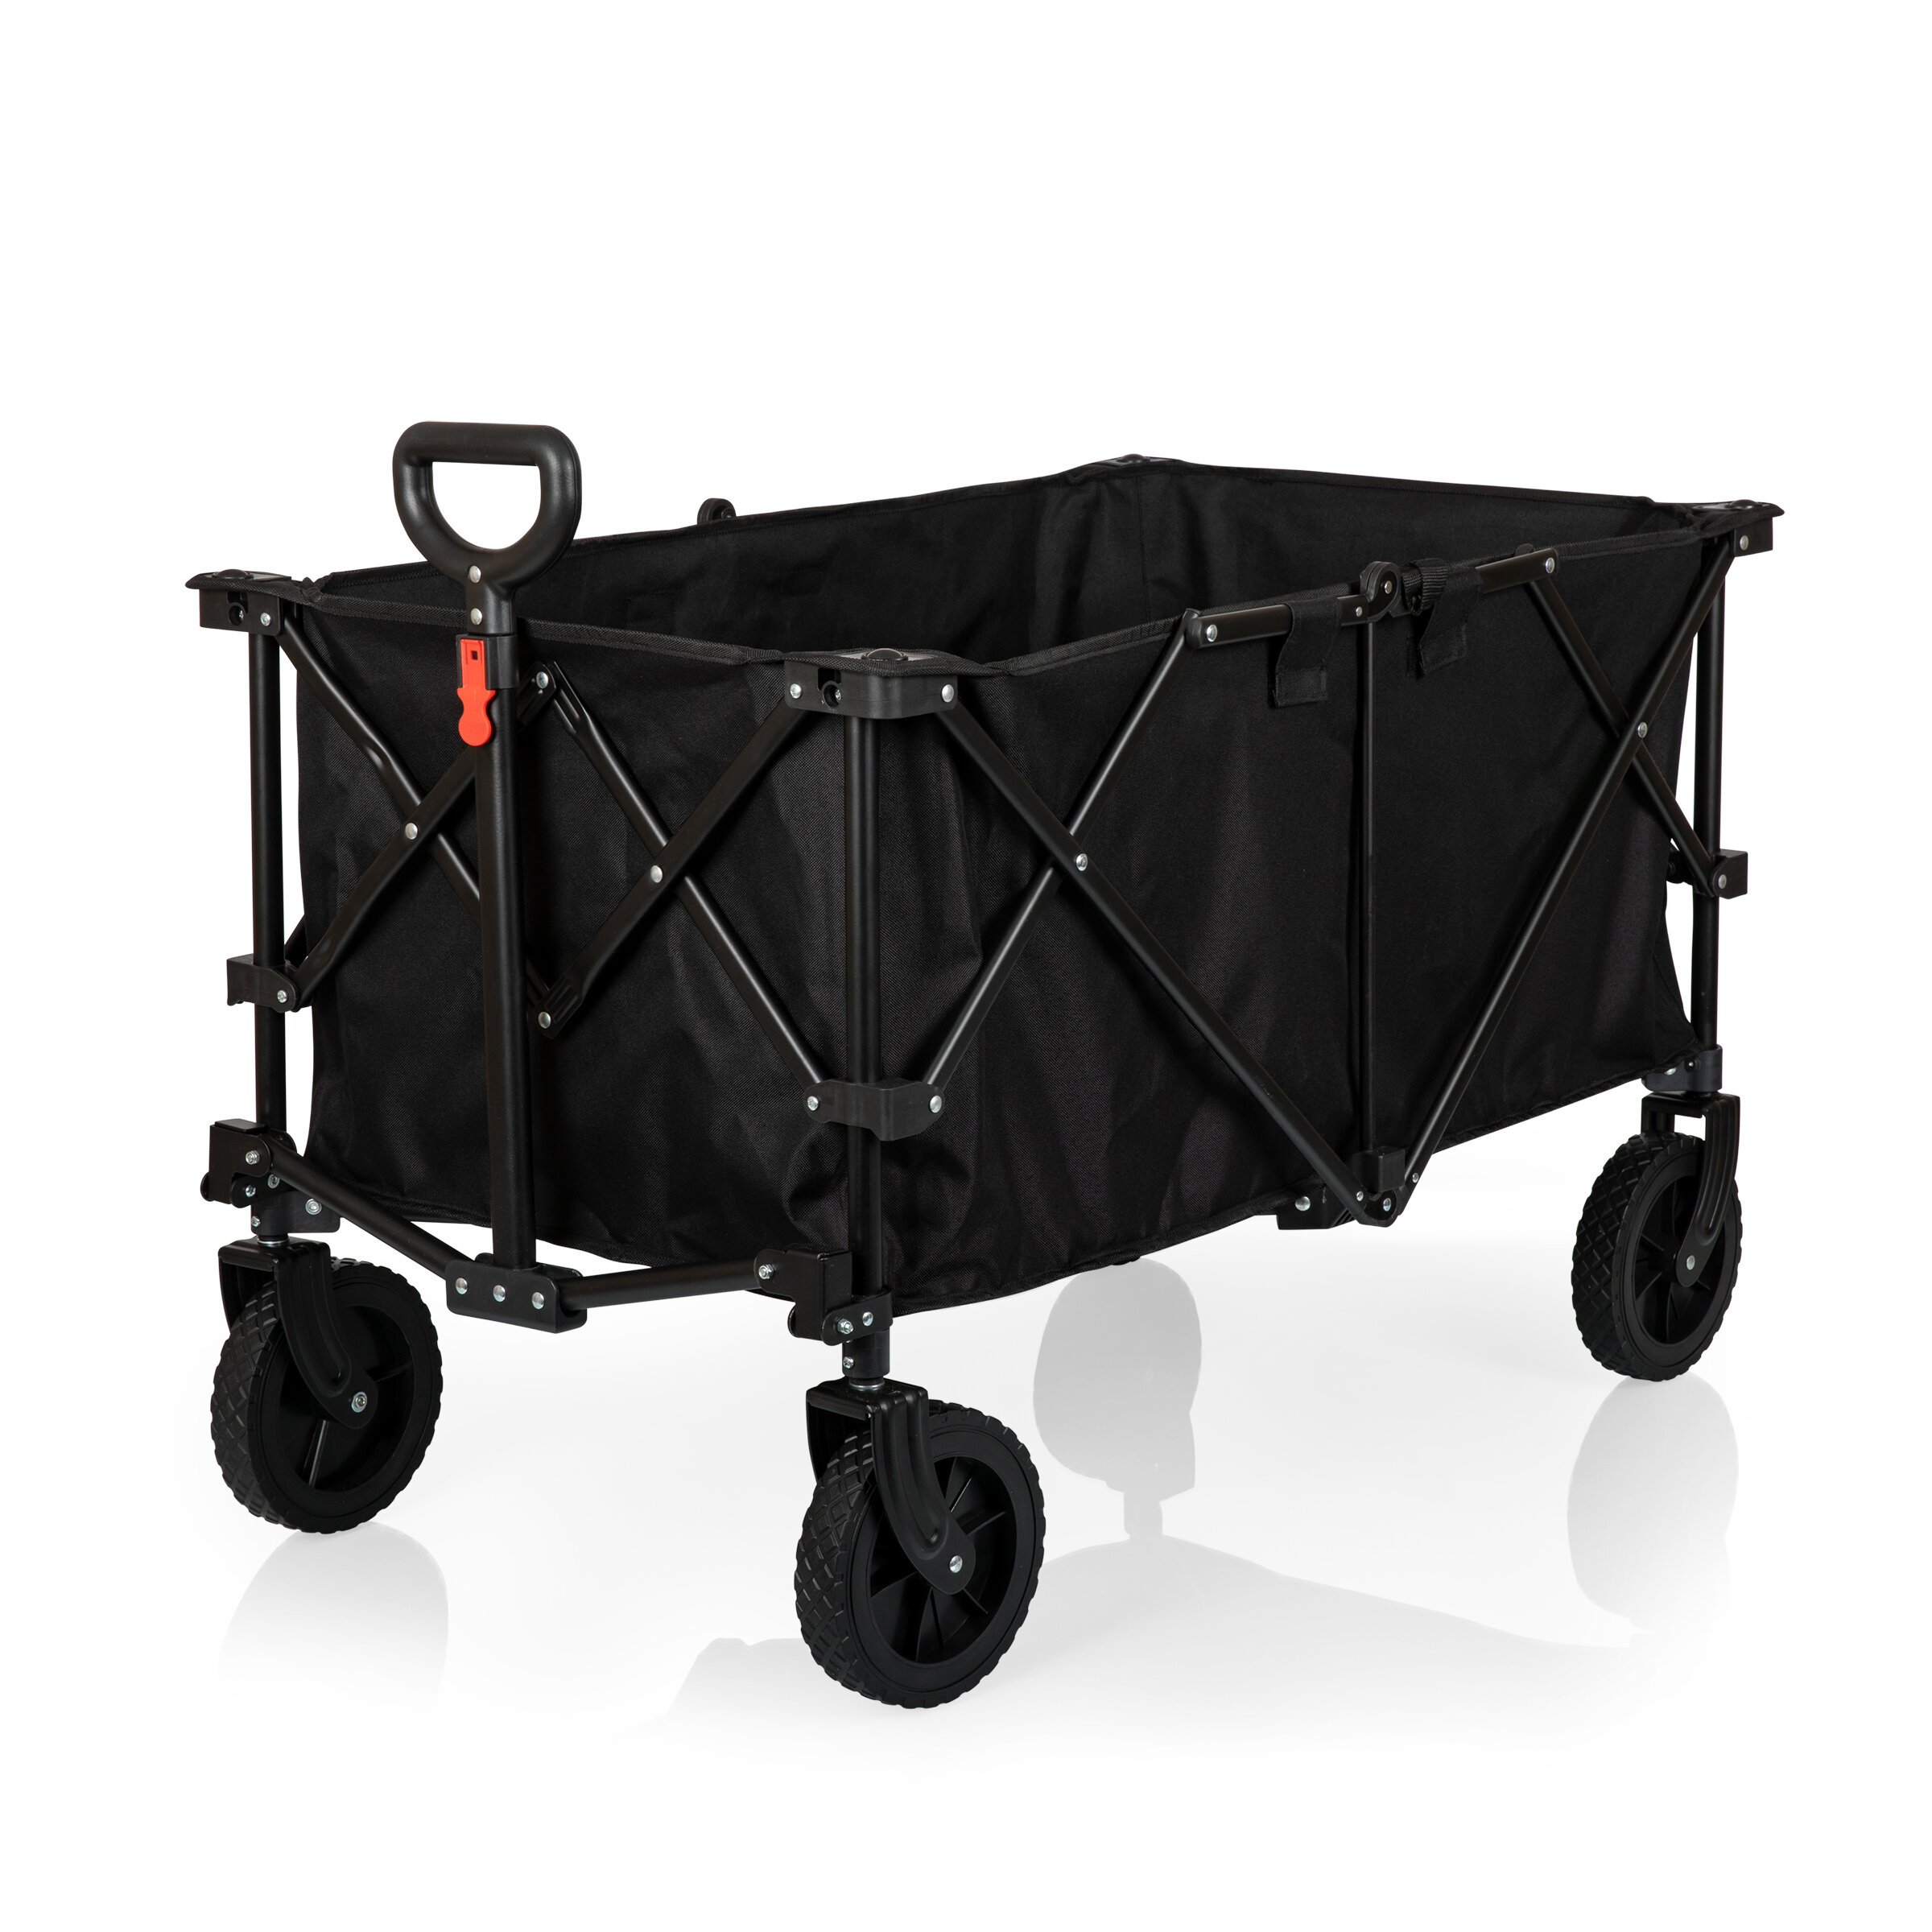 Outsunny Collapsible Folding Utility Cart Wagon Bags & Storage with  Adjustable Push/Pull Handle & Reviews | Wayfair